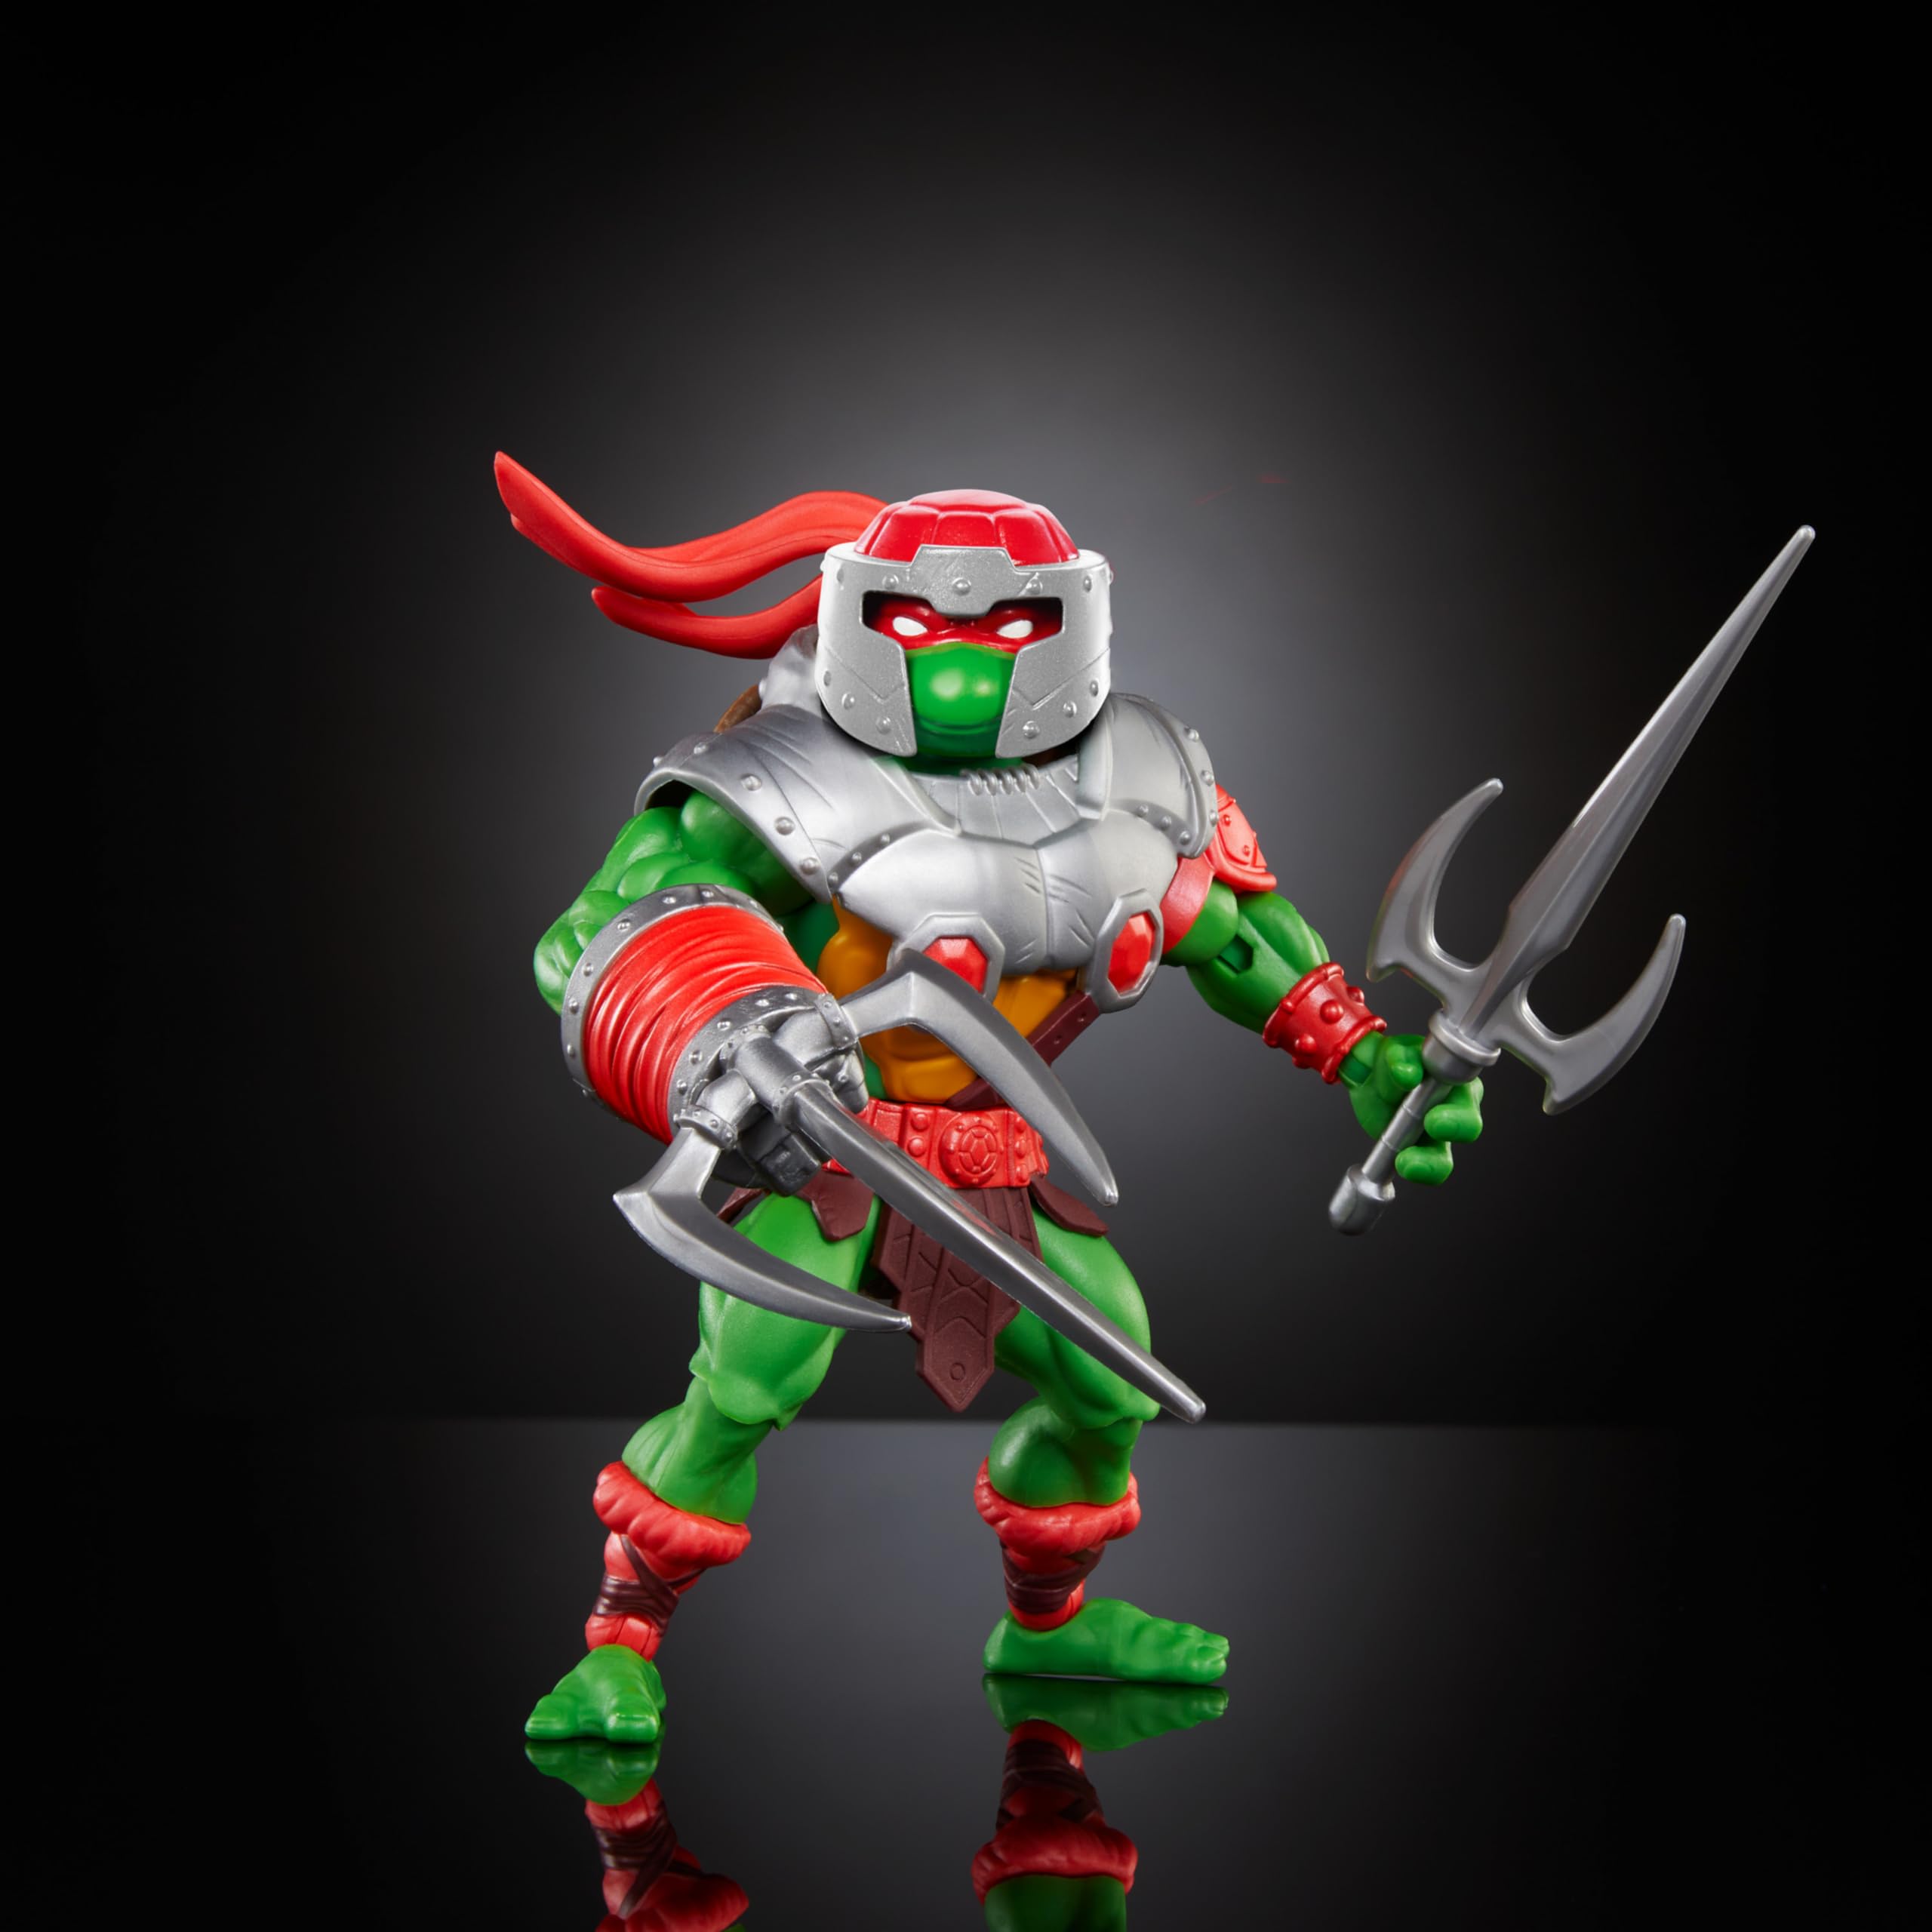 Masters of the Universe Origins Turtles of Grayskull Raphael Action Figure Toy, 16 Articulations, TMNT & Motu Crossover with Accessories